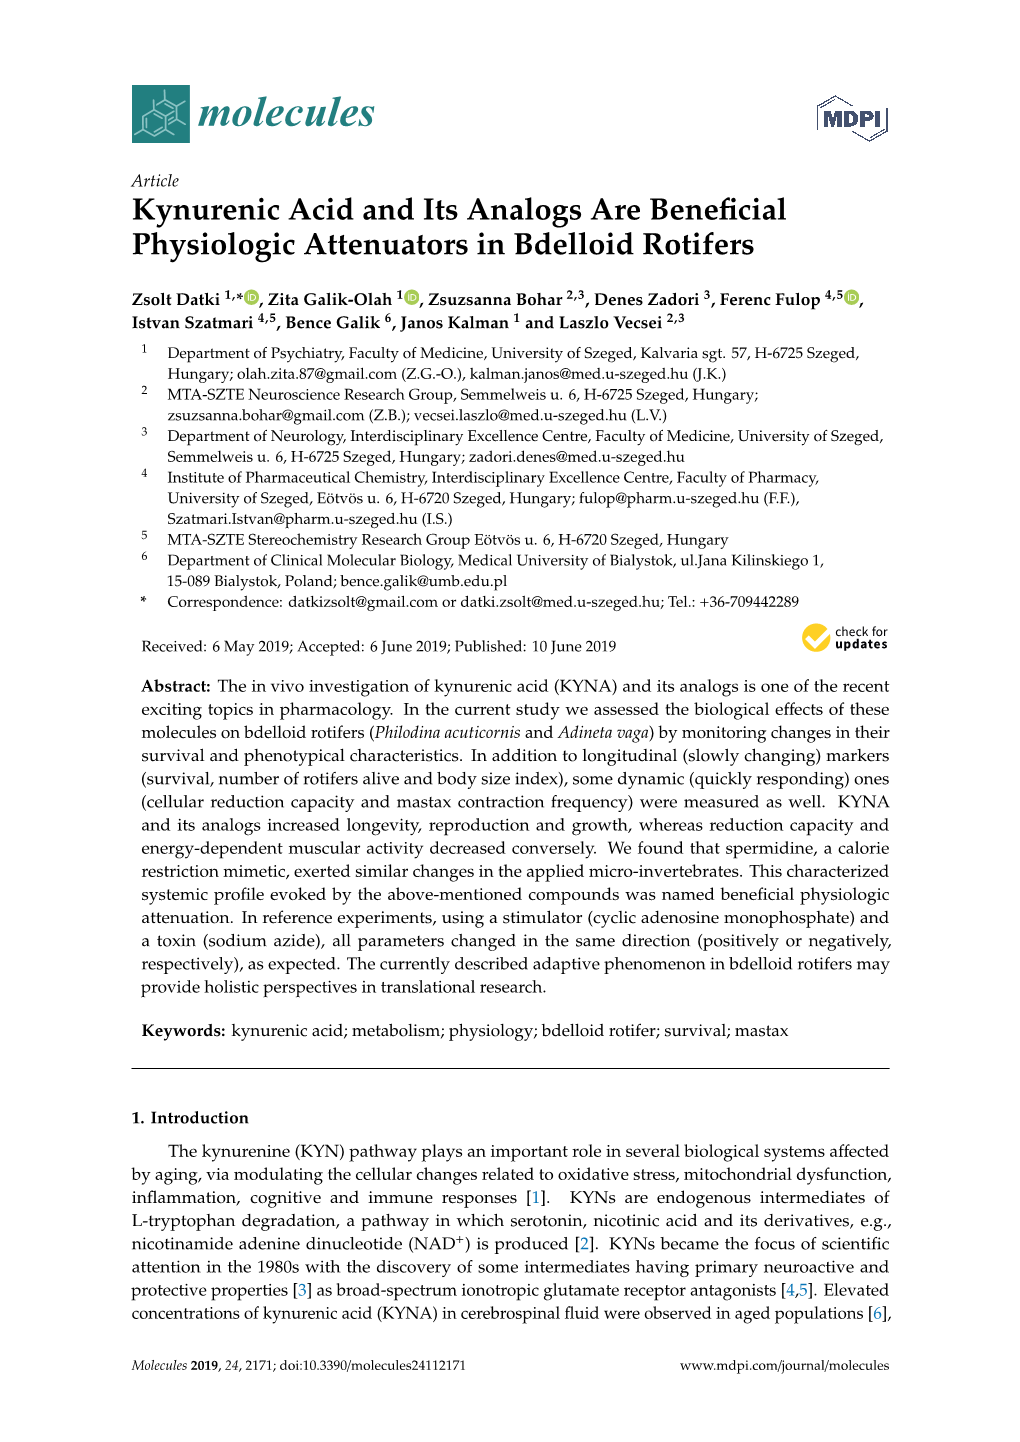 Kynurenic Acid and Its Analogs Are Beneficial Physiologic Attenuators